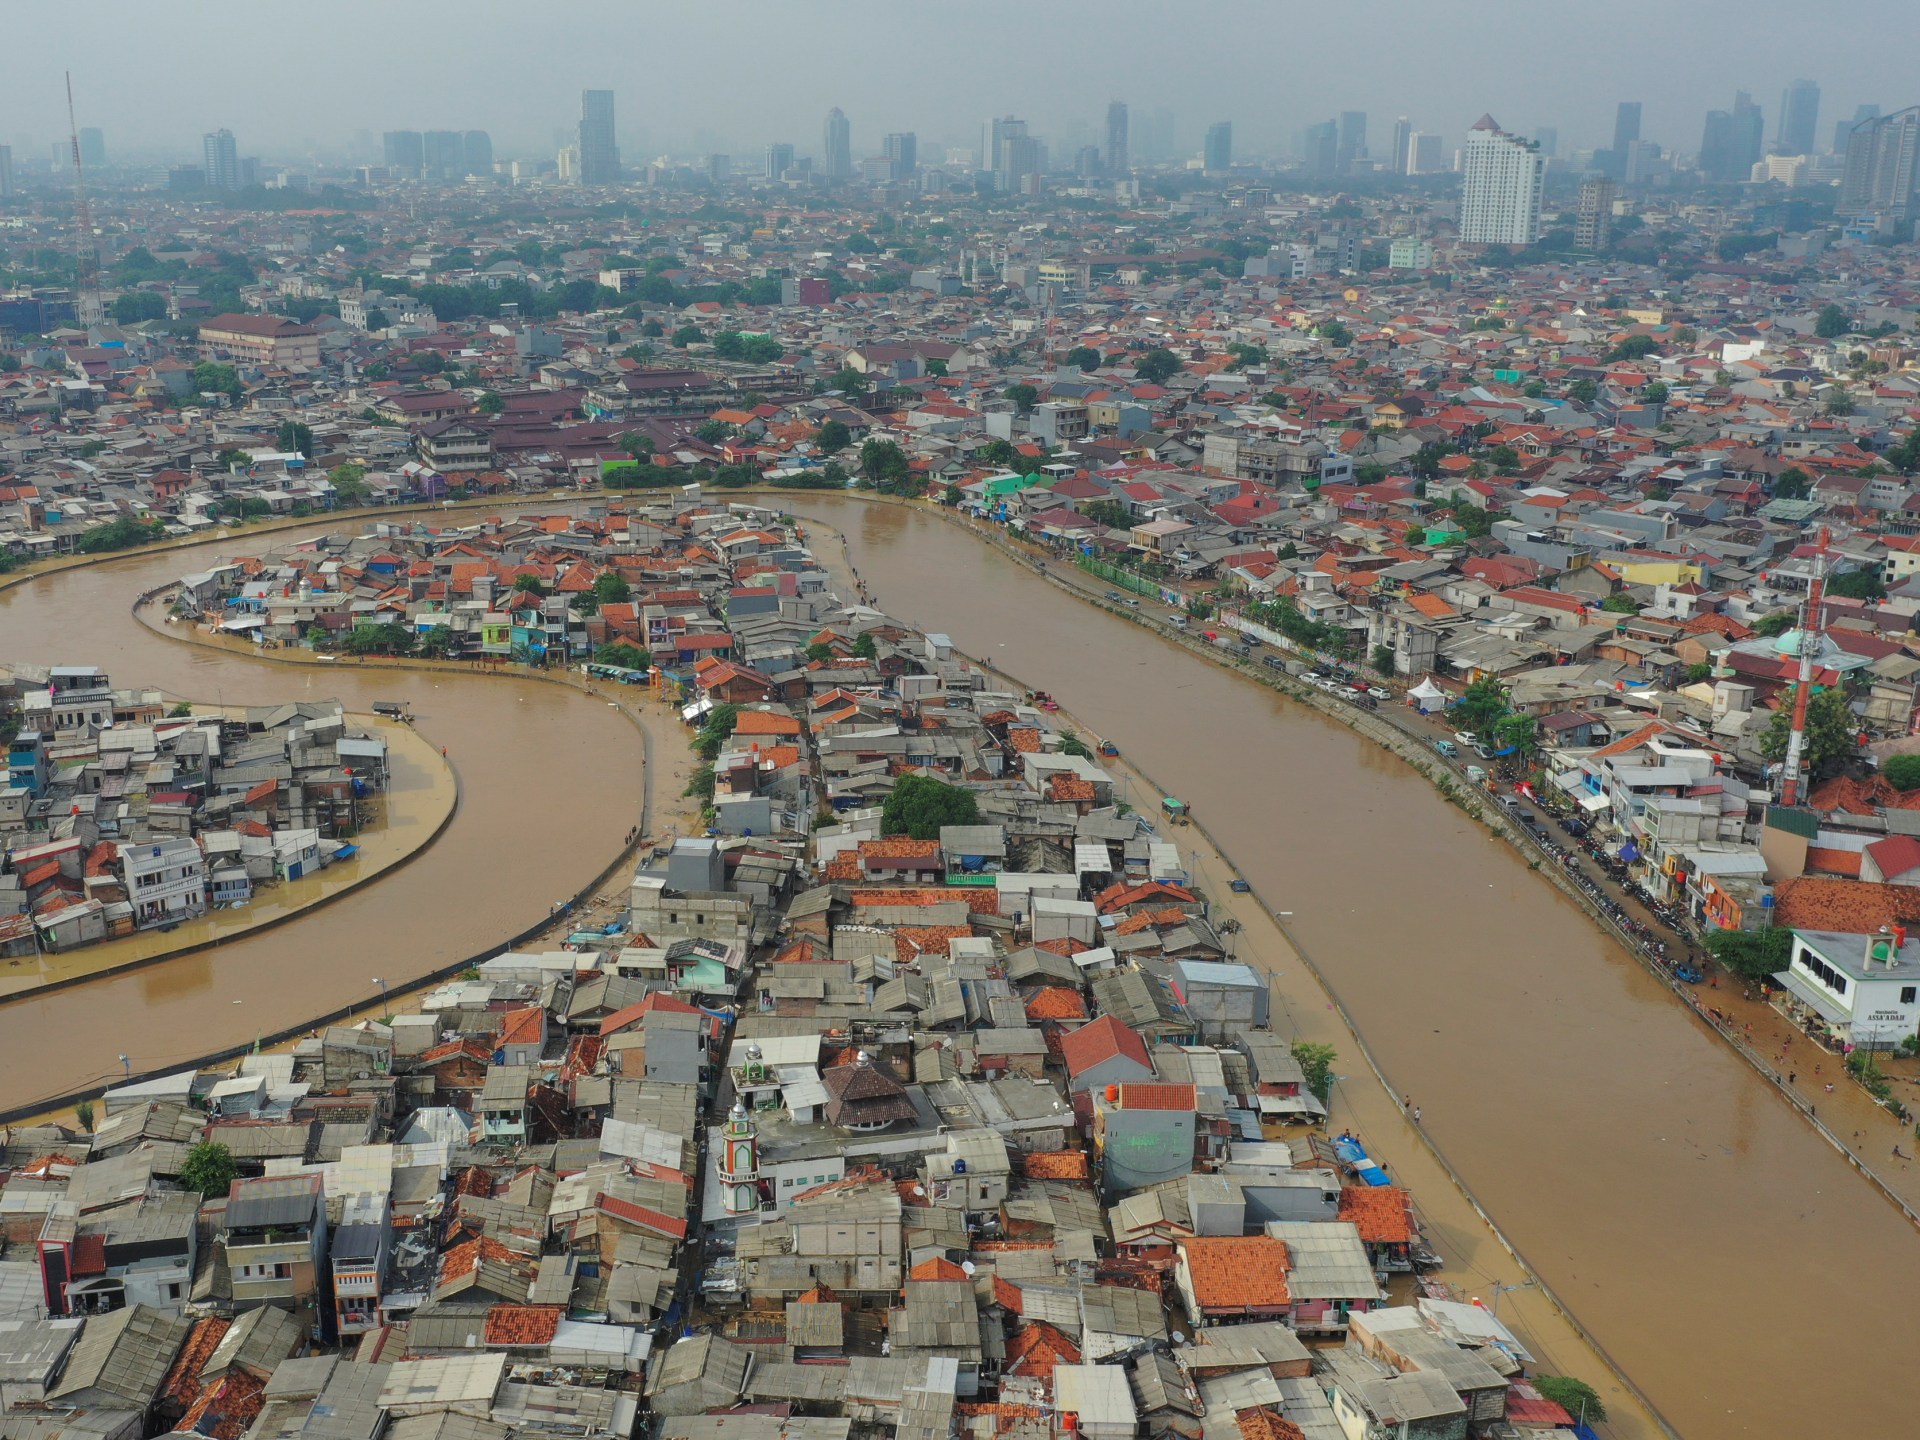 Why Indonesia is abandoning its capital city to save it